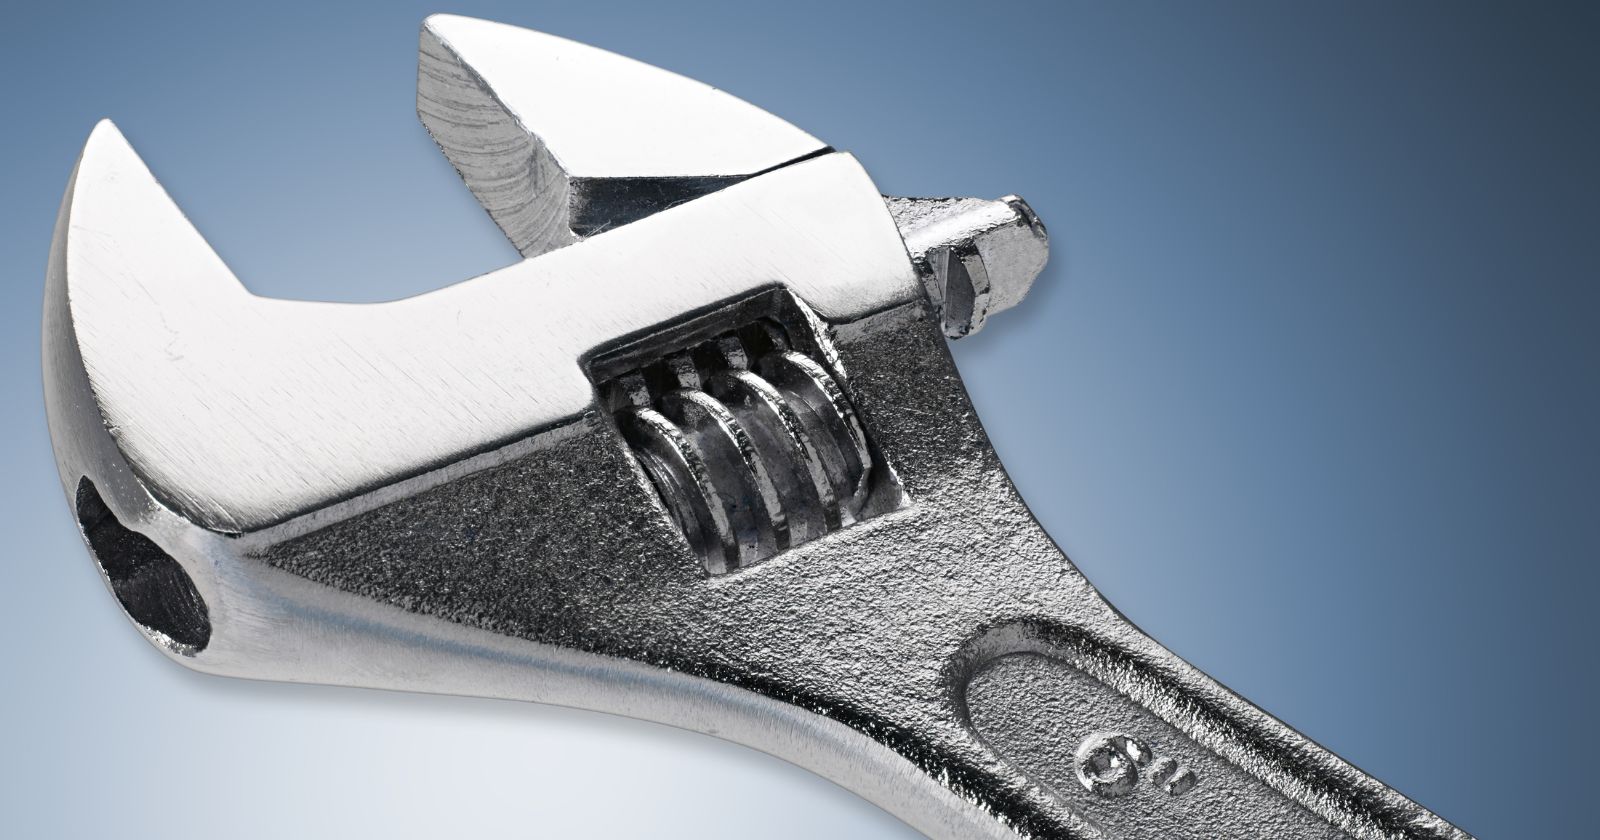 How To Use An Adjustable Wrench